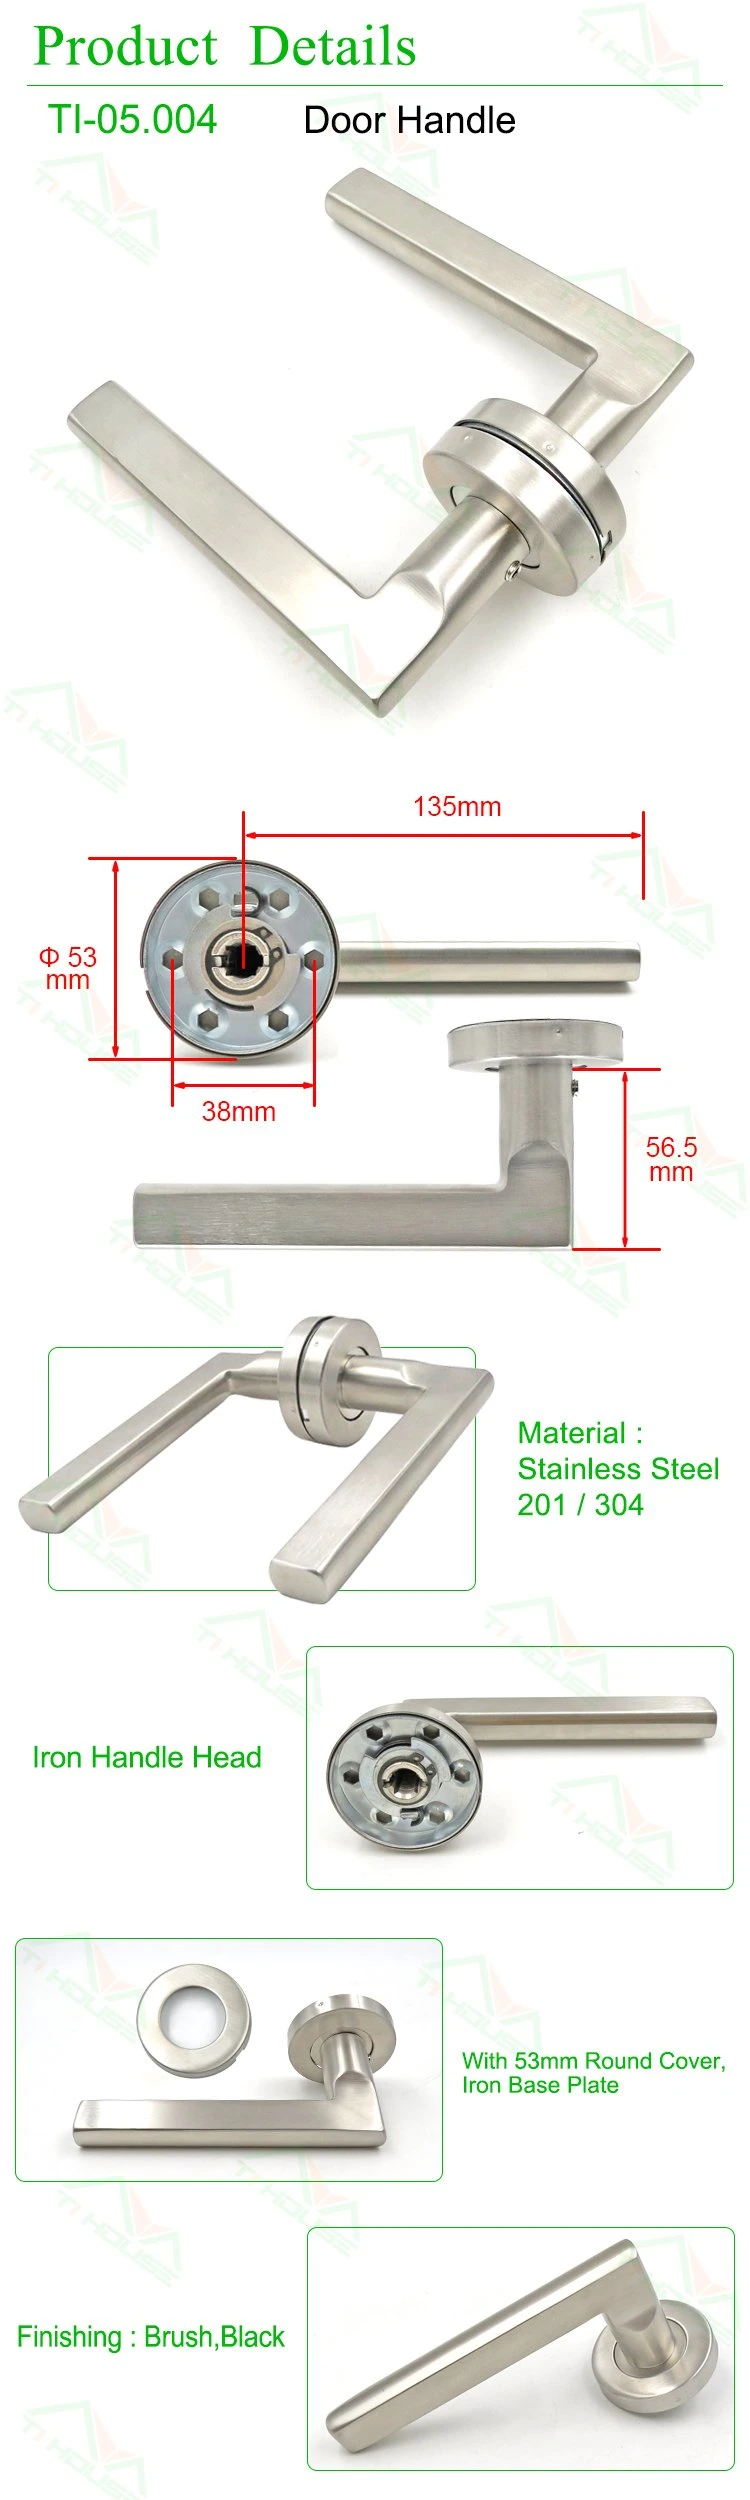 Furniture Hardware Tubular Door Handle New Security Internal Stainless Steel Hollow Pull Lever Handle